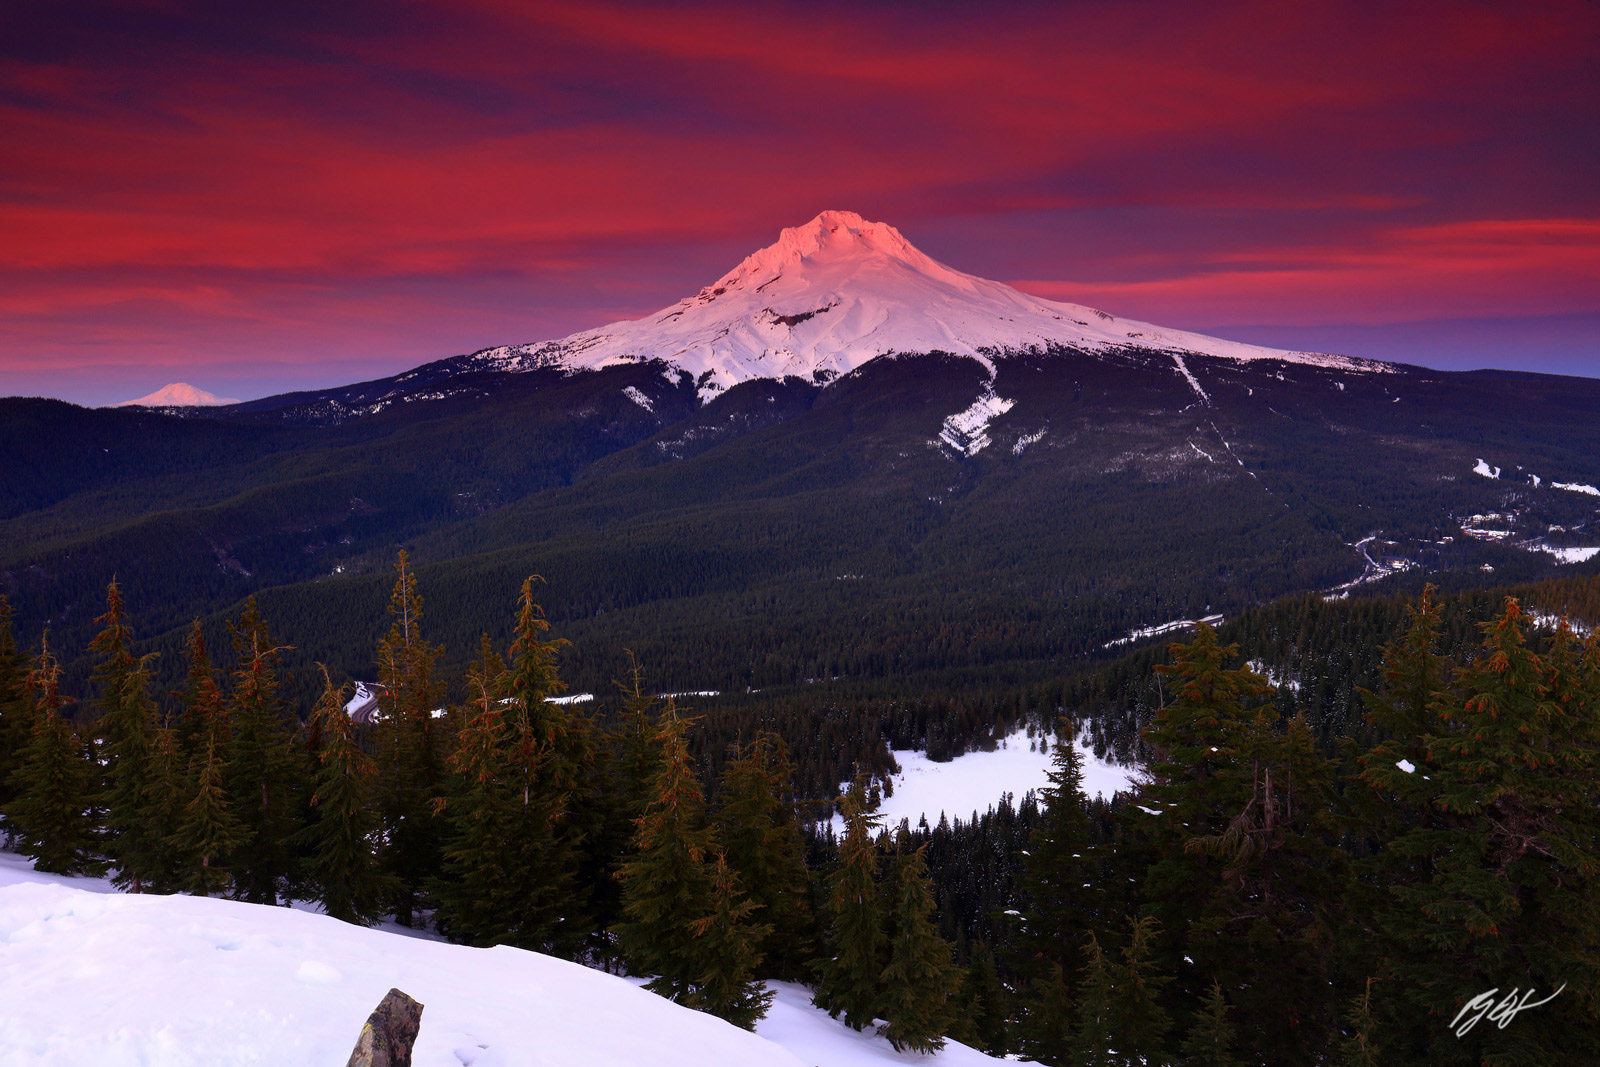 Winter Sunset with Mt Hood and Mt Adams from the Summit of Tom, Dick and Harry Mountain in the Mt Hood Wilderness in Oregon